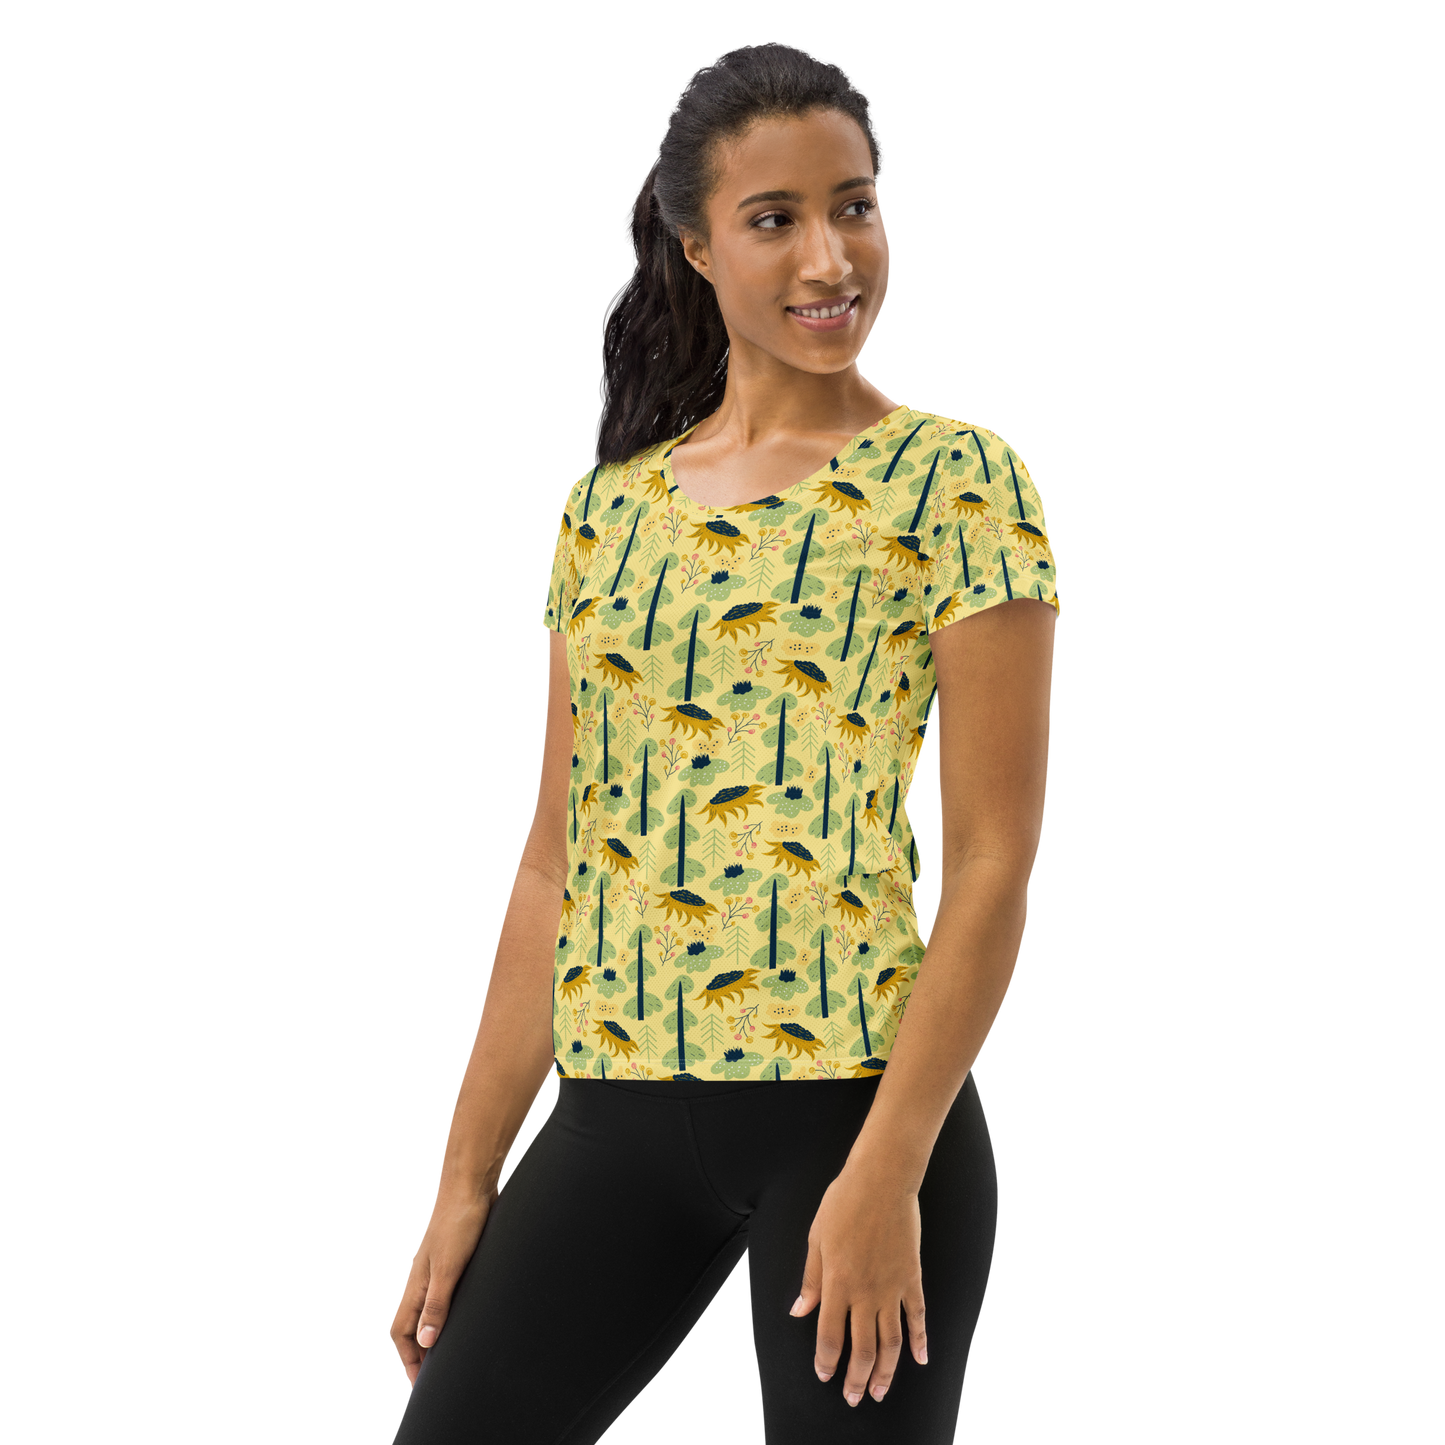 Scandinavian Spring Floral | Seamless Patterns | All-Over Print Women's Athletic T-Shirt - #1